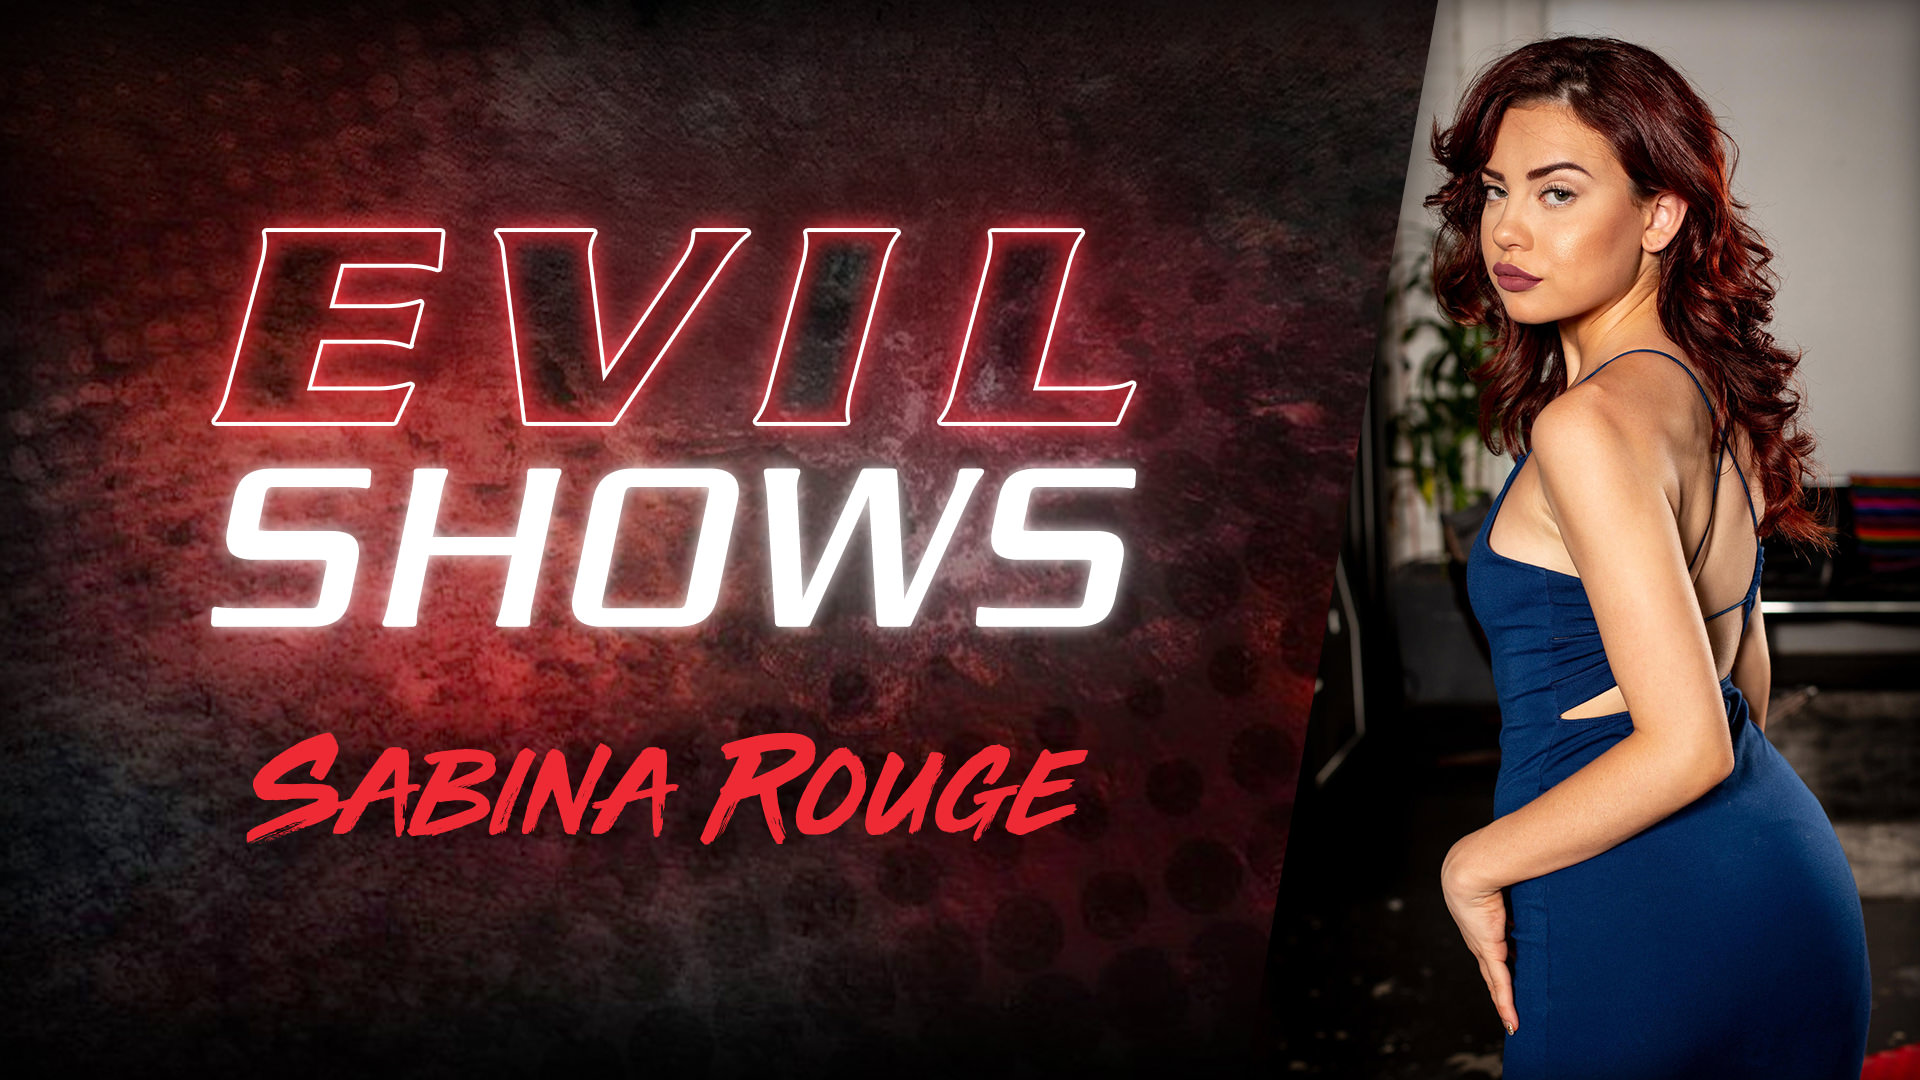 Evil shows sabina rouge sabina rouge Sabina Rouge shows off